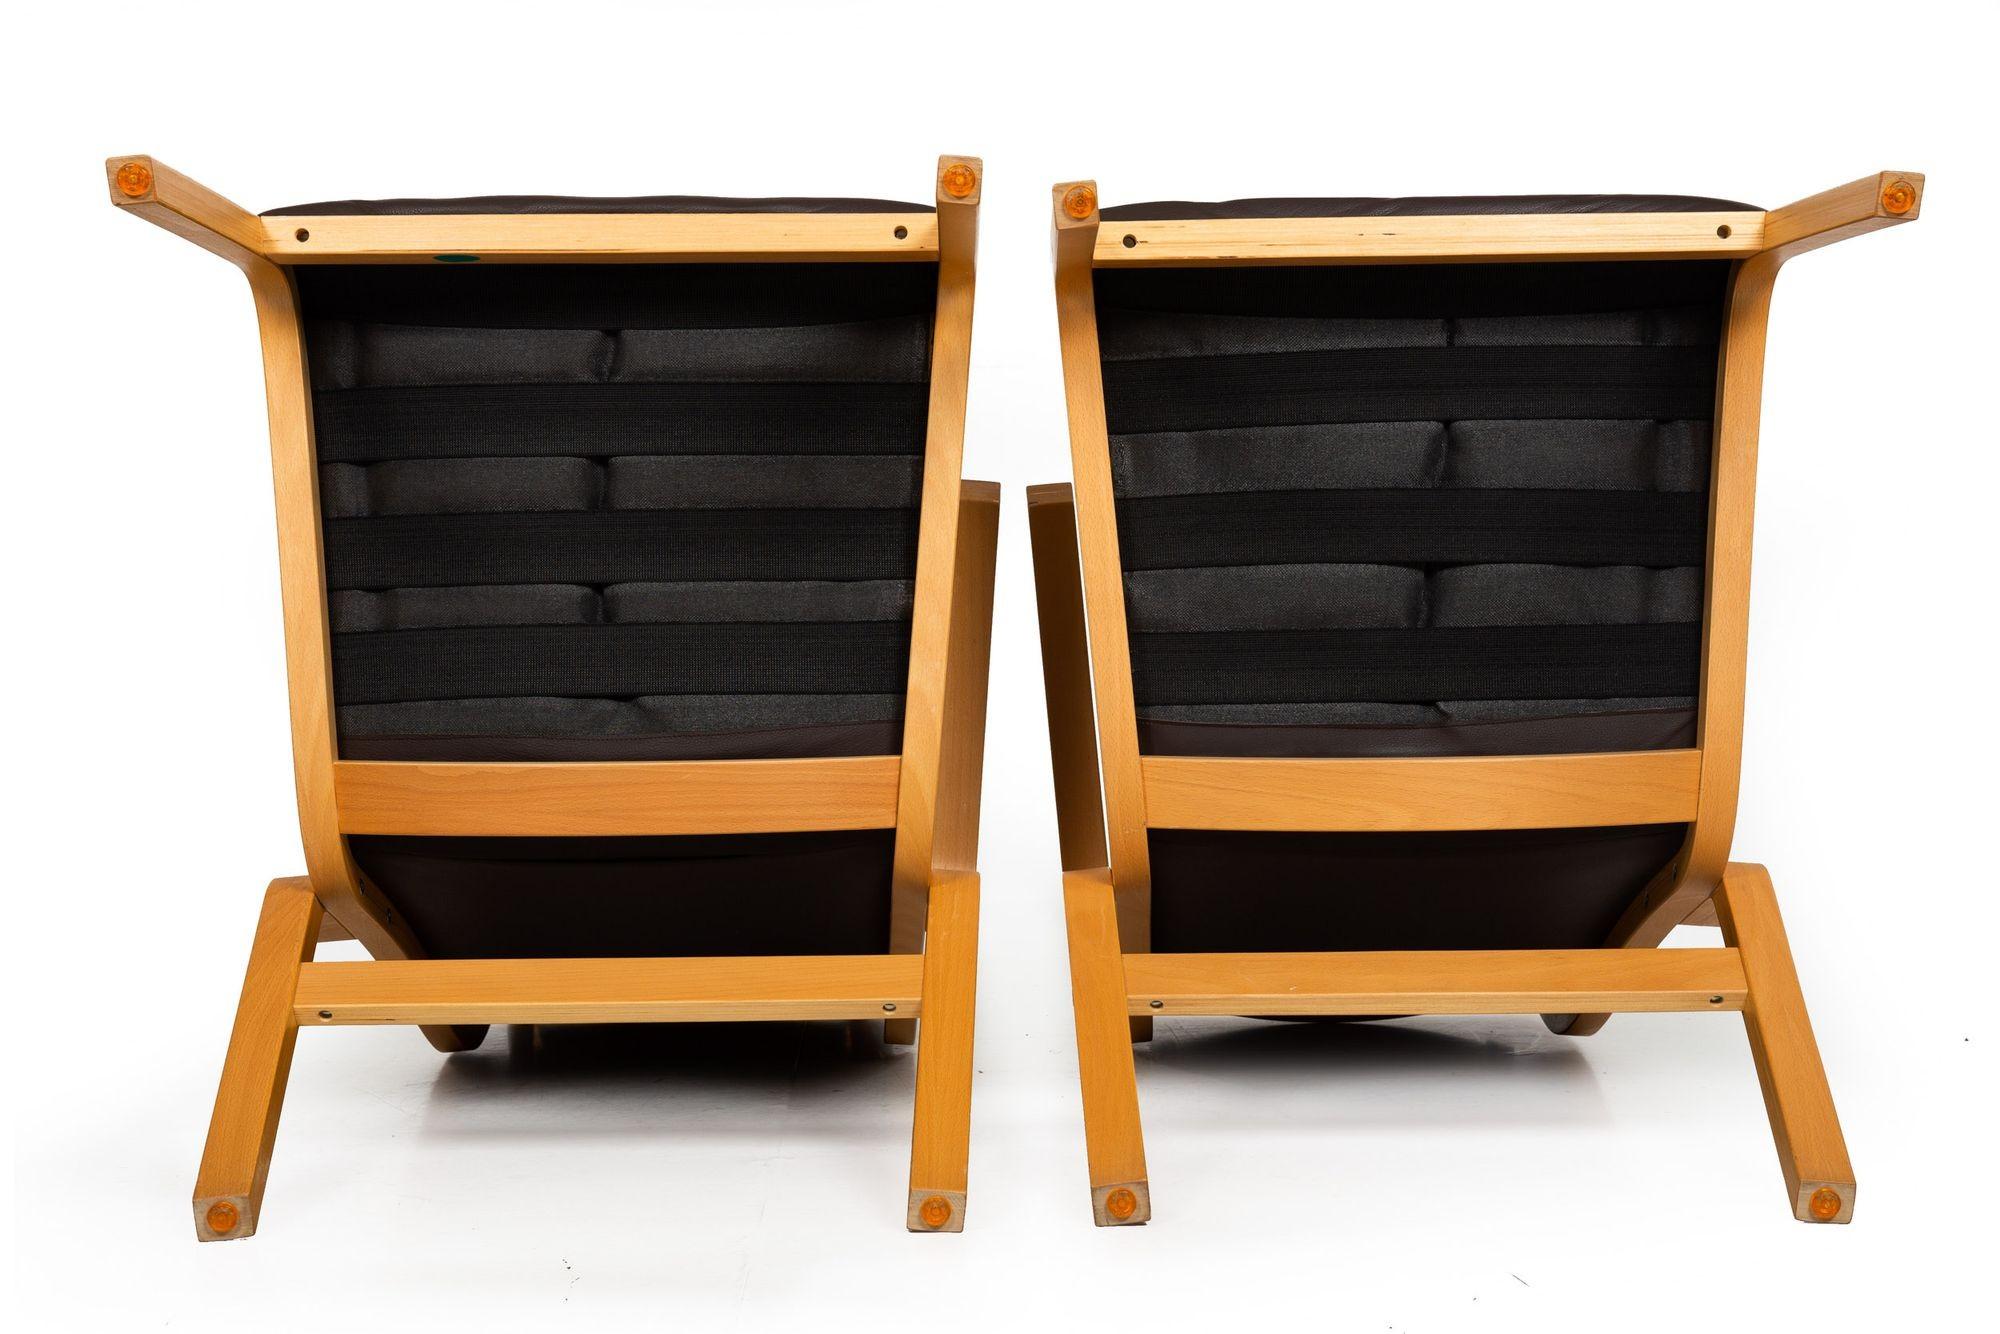 Scandinavian Modern Bentwood Leather Arm Chairs with Ottomans - A Pair For Sale 10